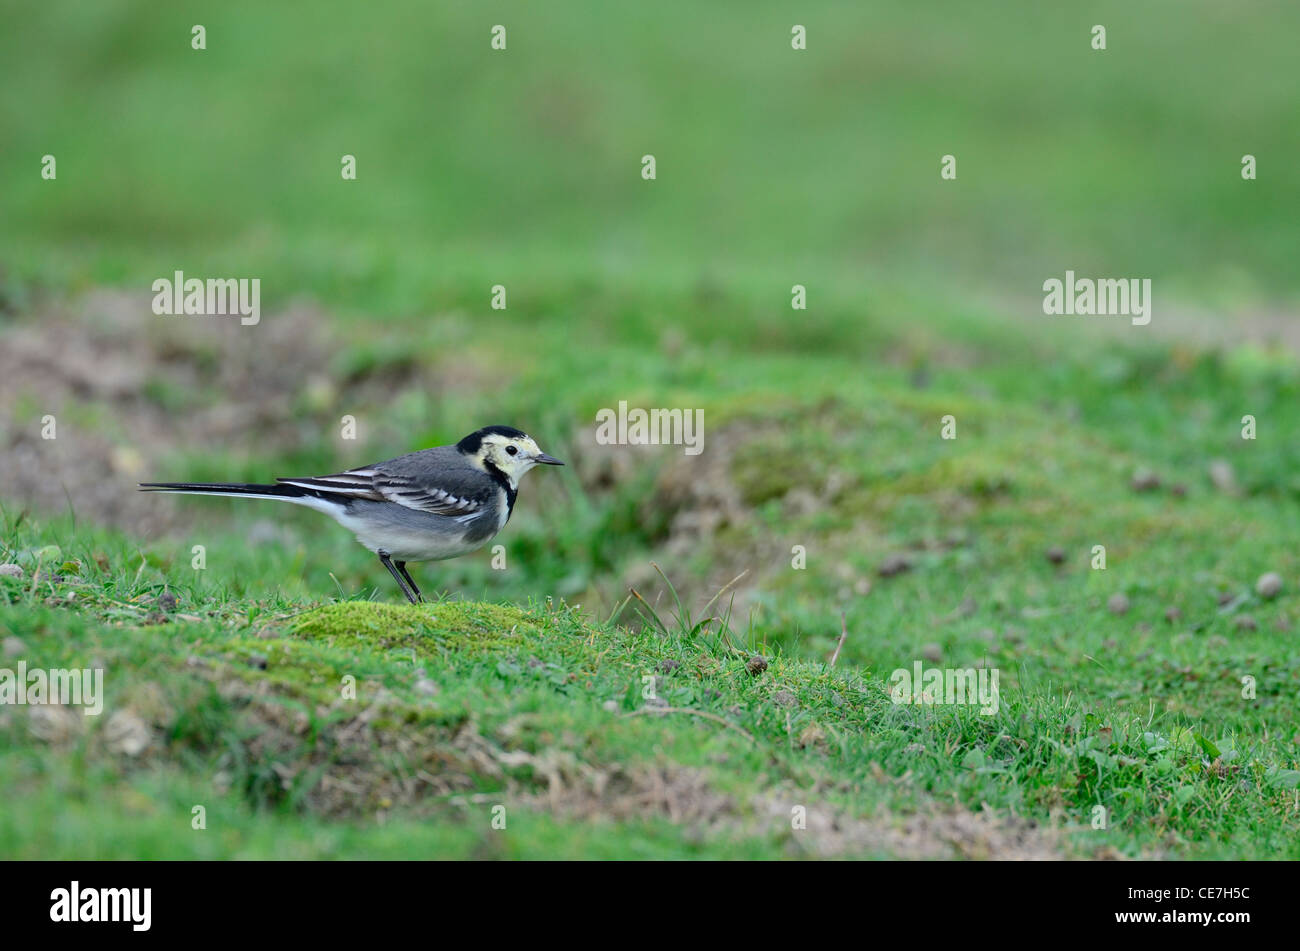 Pied wagtail on grass Stock Photo